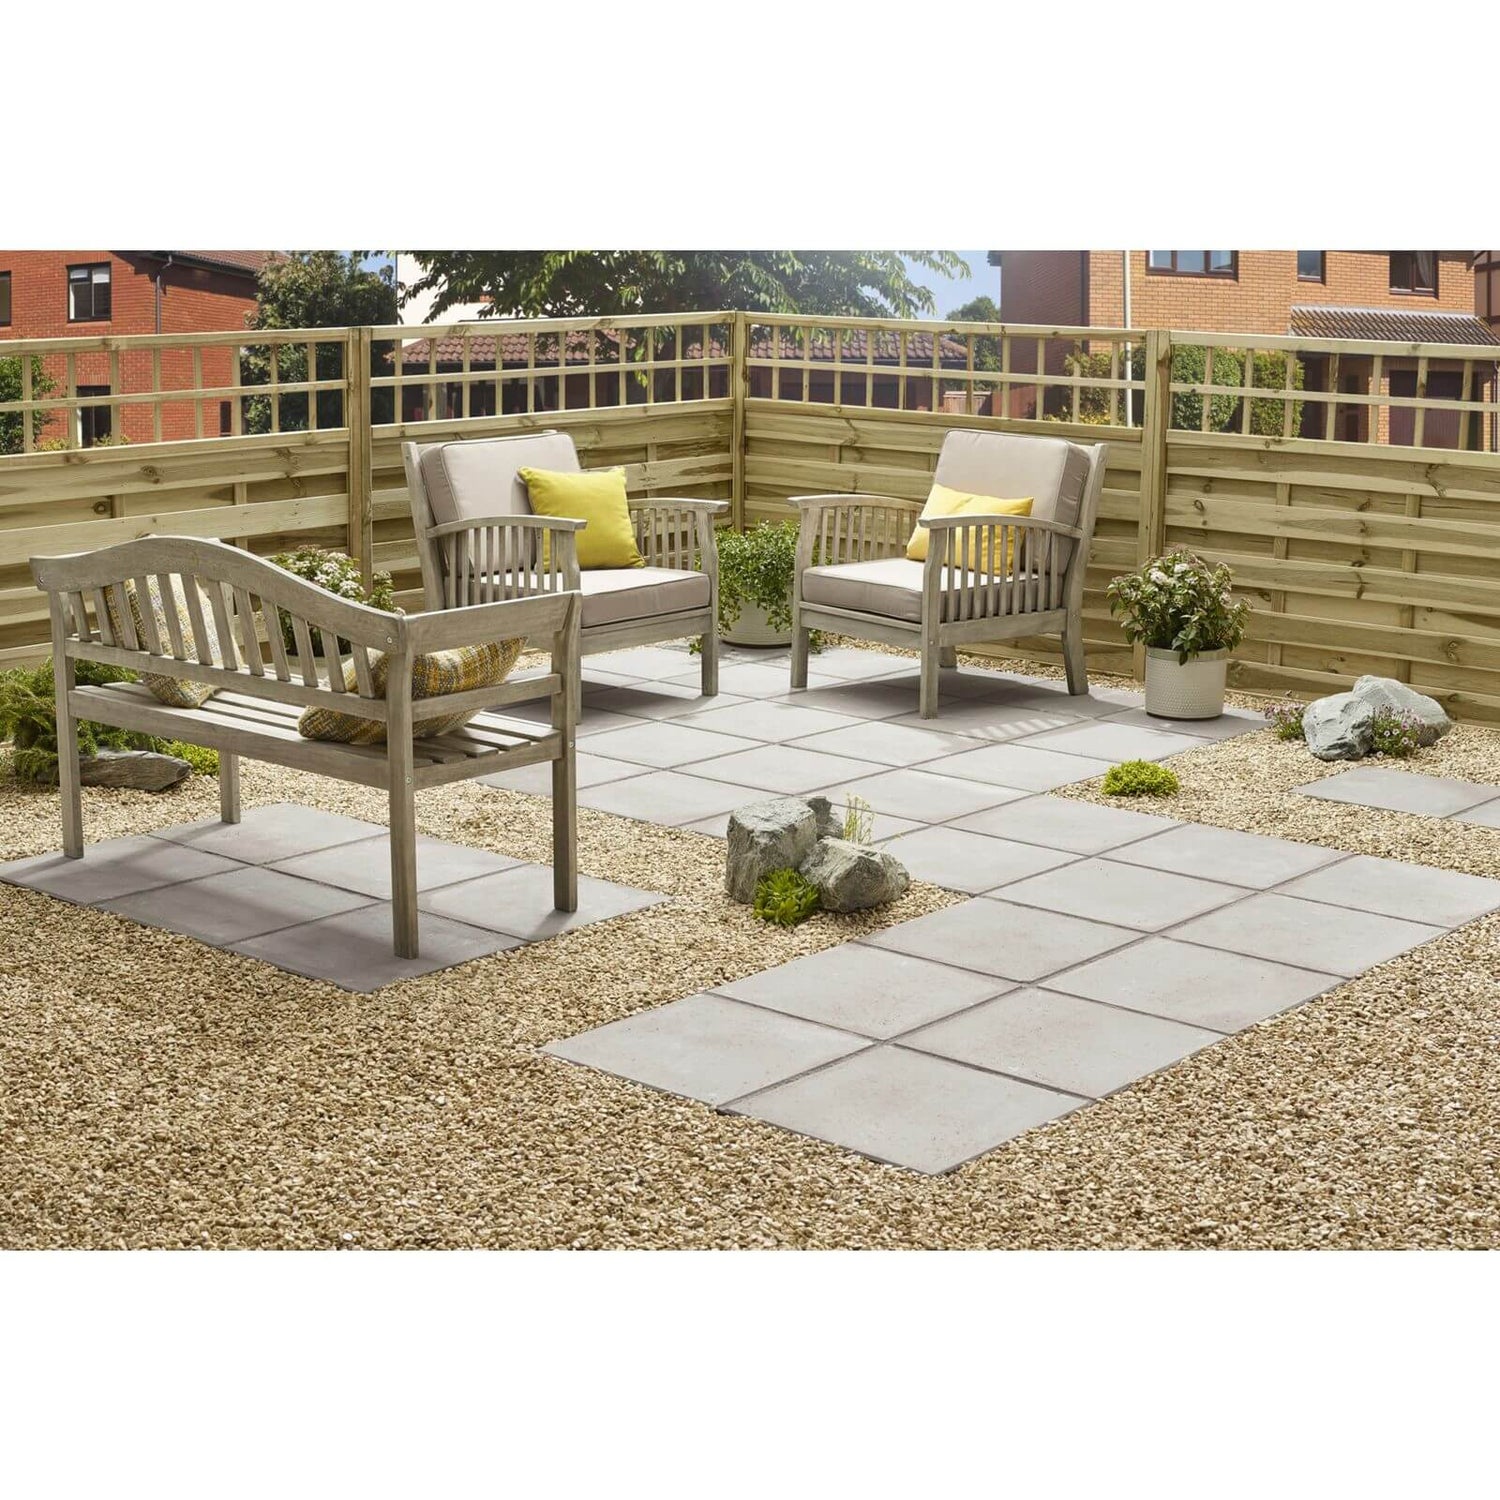 Stylish Stone Hereford Paving Smooth 450 x 450mm - Grey (Full Pack)